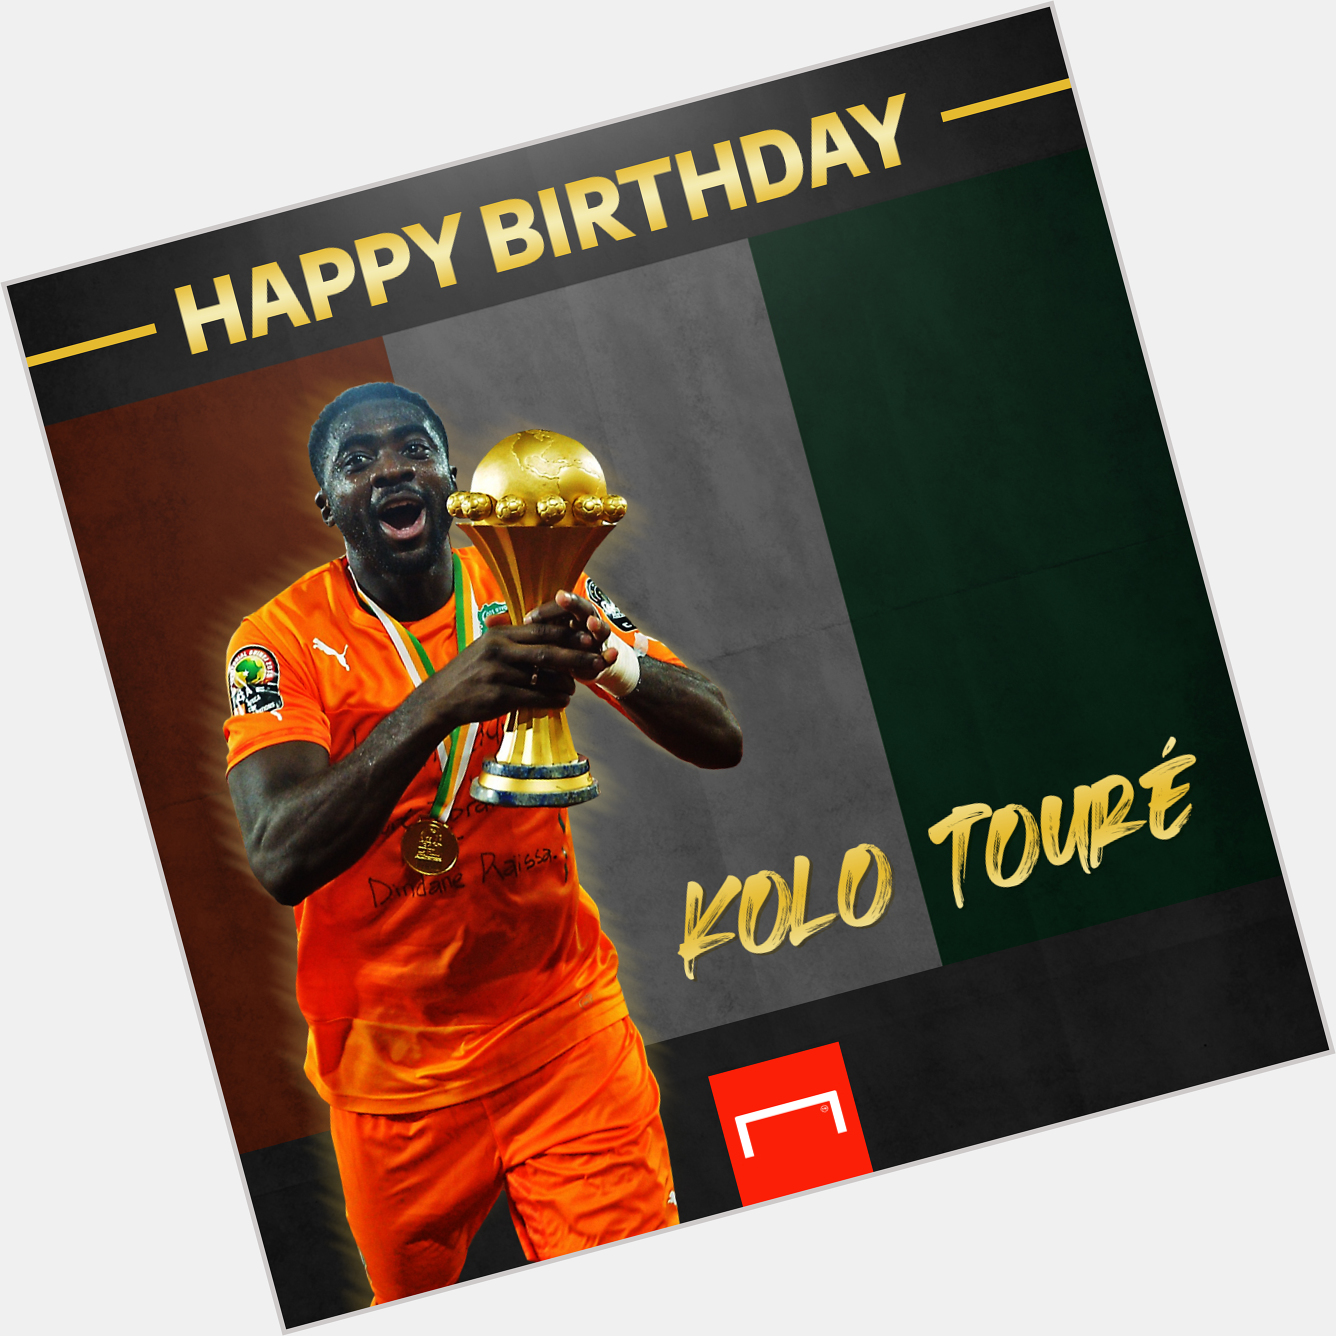 Join us in wishing Kolo Toure a happy birthday!    One of Africa\s finest... 